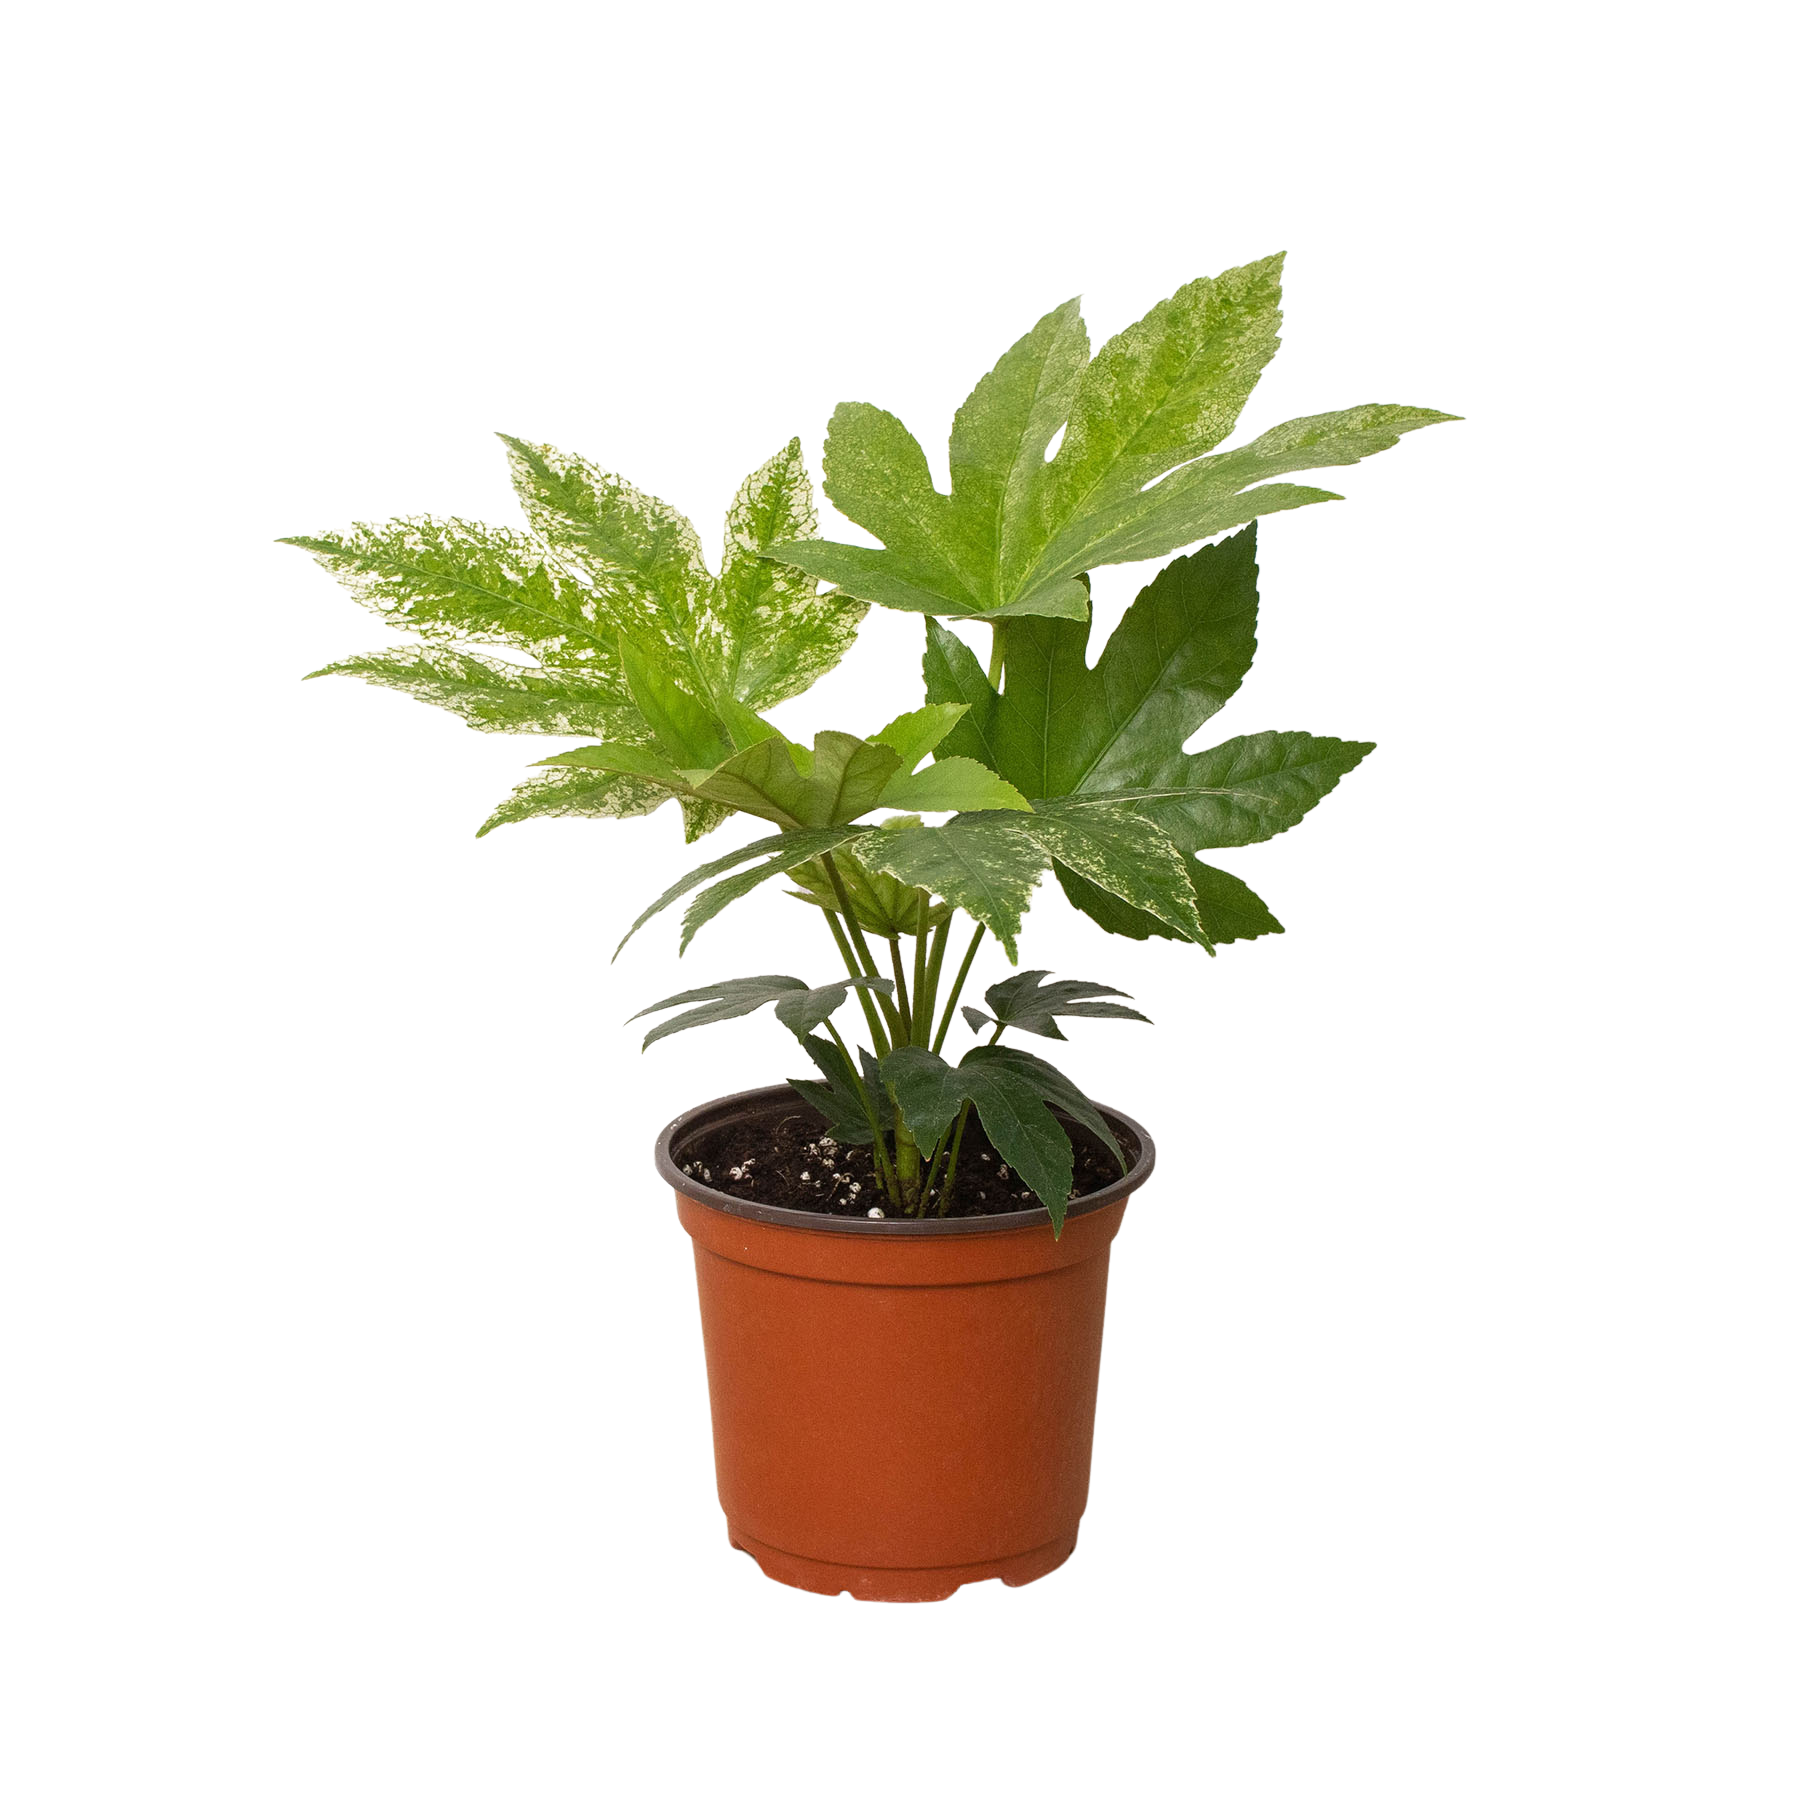 A small plant in a pot on a white background at one of the top garden centers near me.